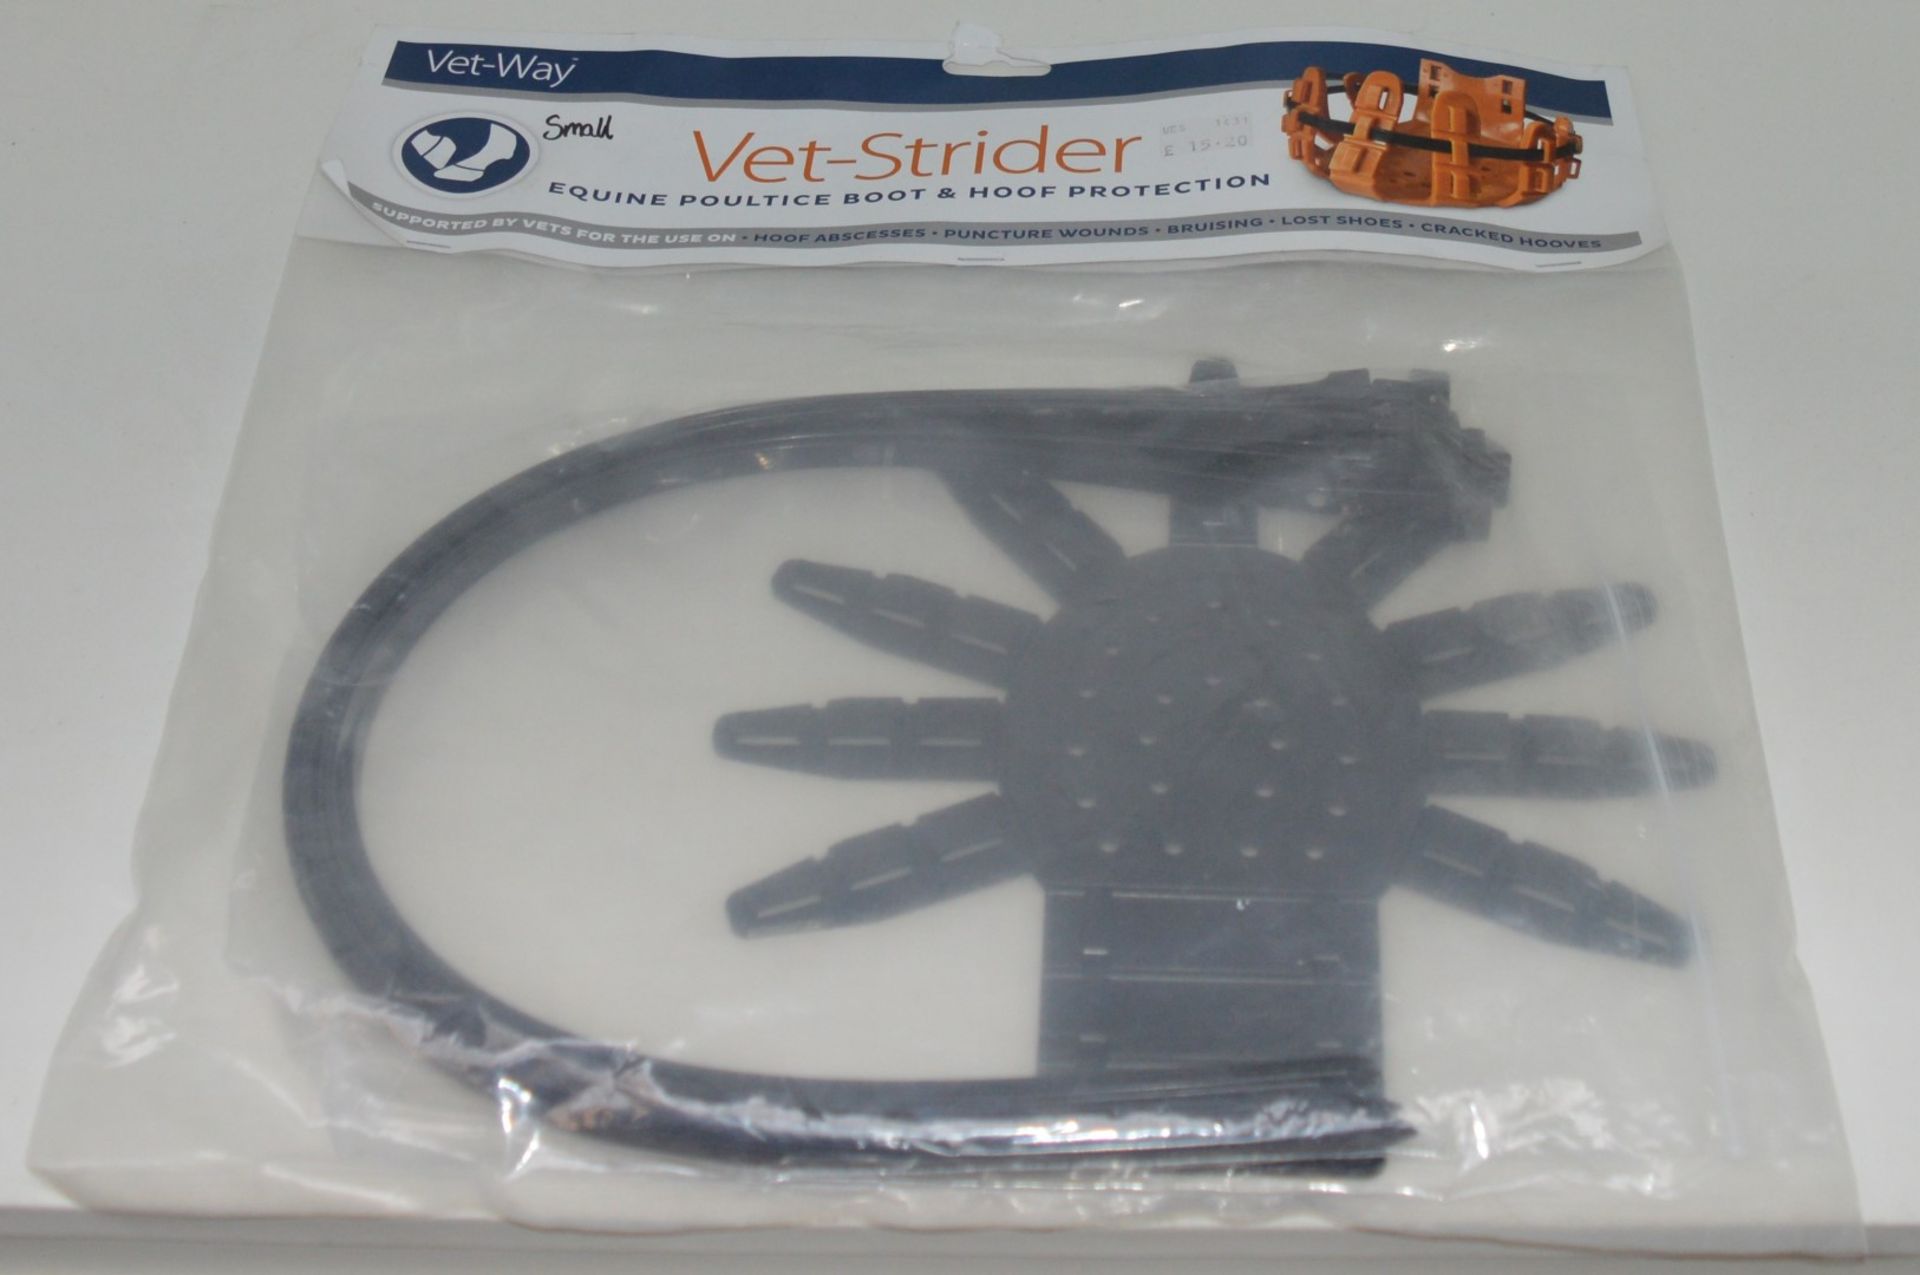 1 x Vet-Strider Equine Poultice Boot and Hoof Protection - CL401 - Suitable For Use on Hoof - Image 2 of 4